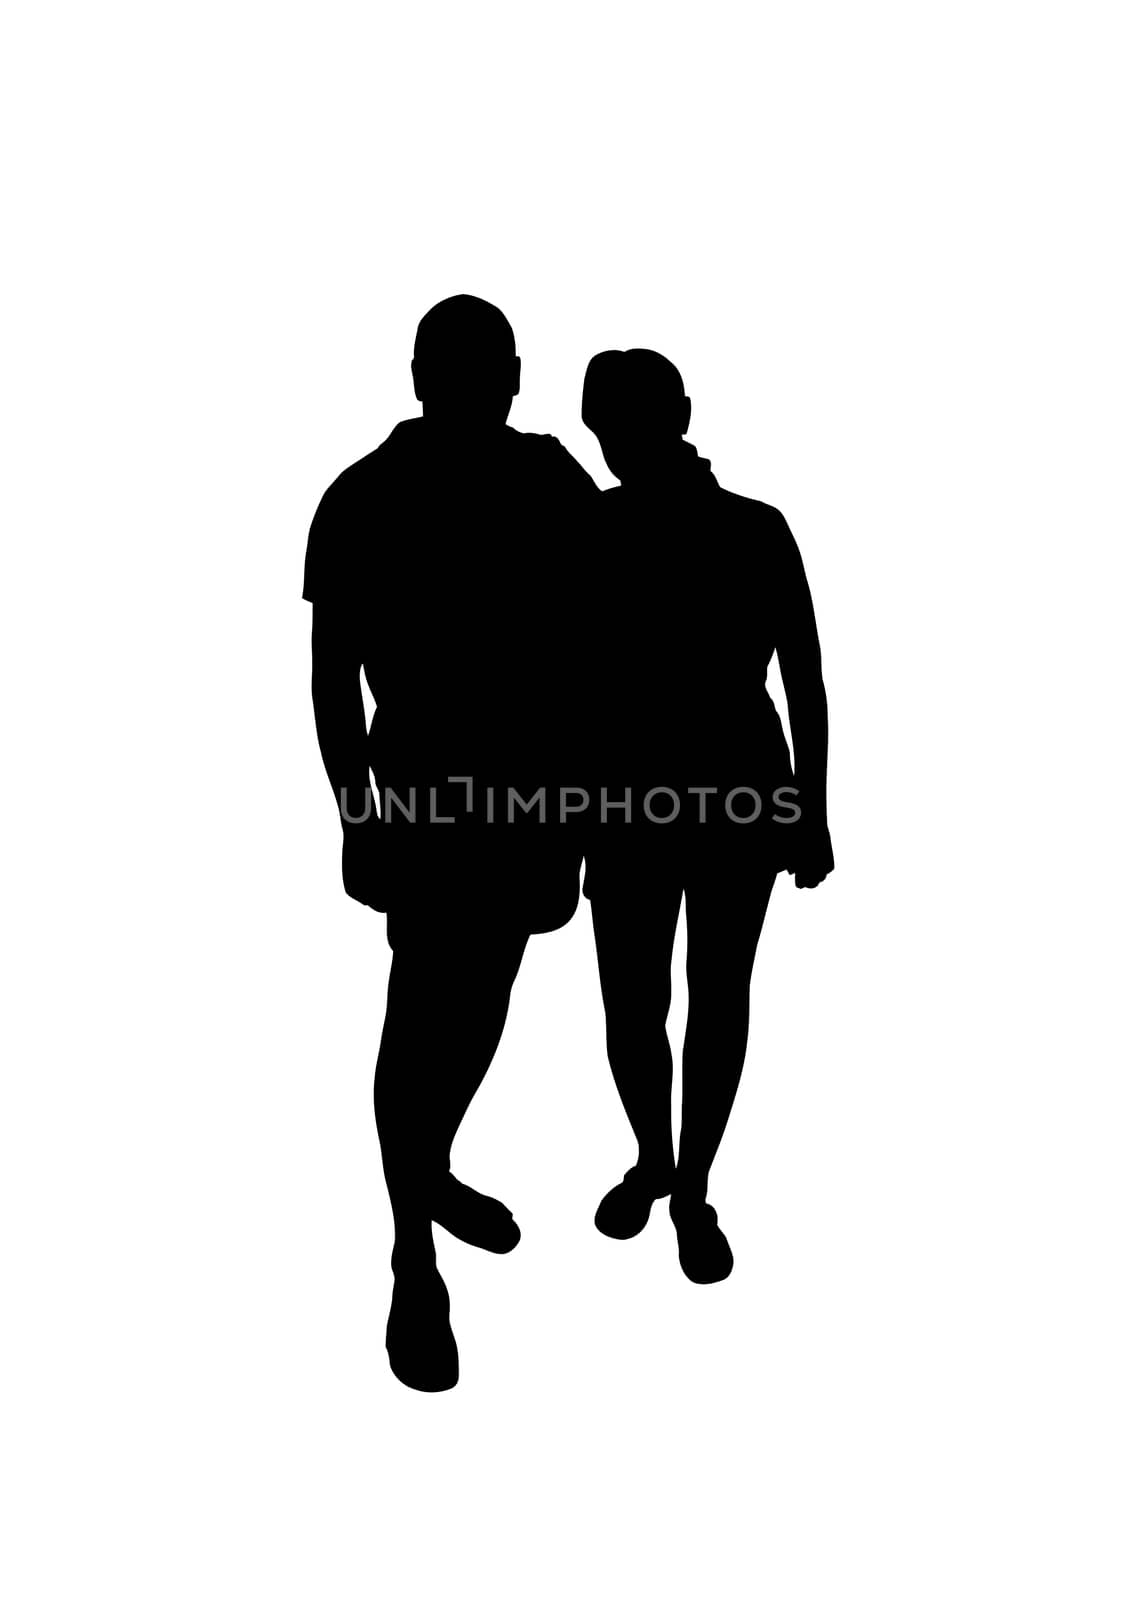 Silhouettes of men and women standing together, isolated on white background.